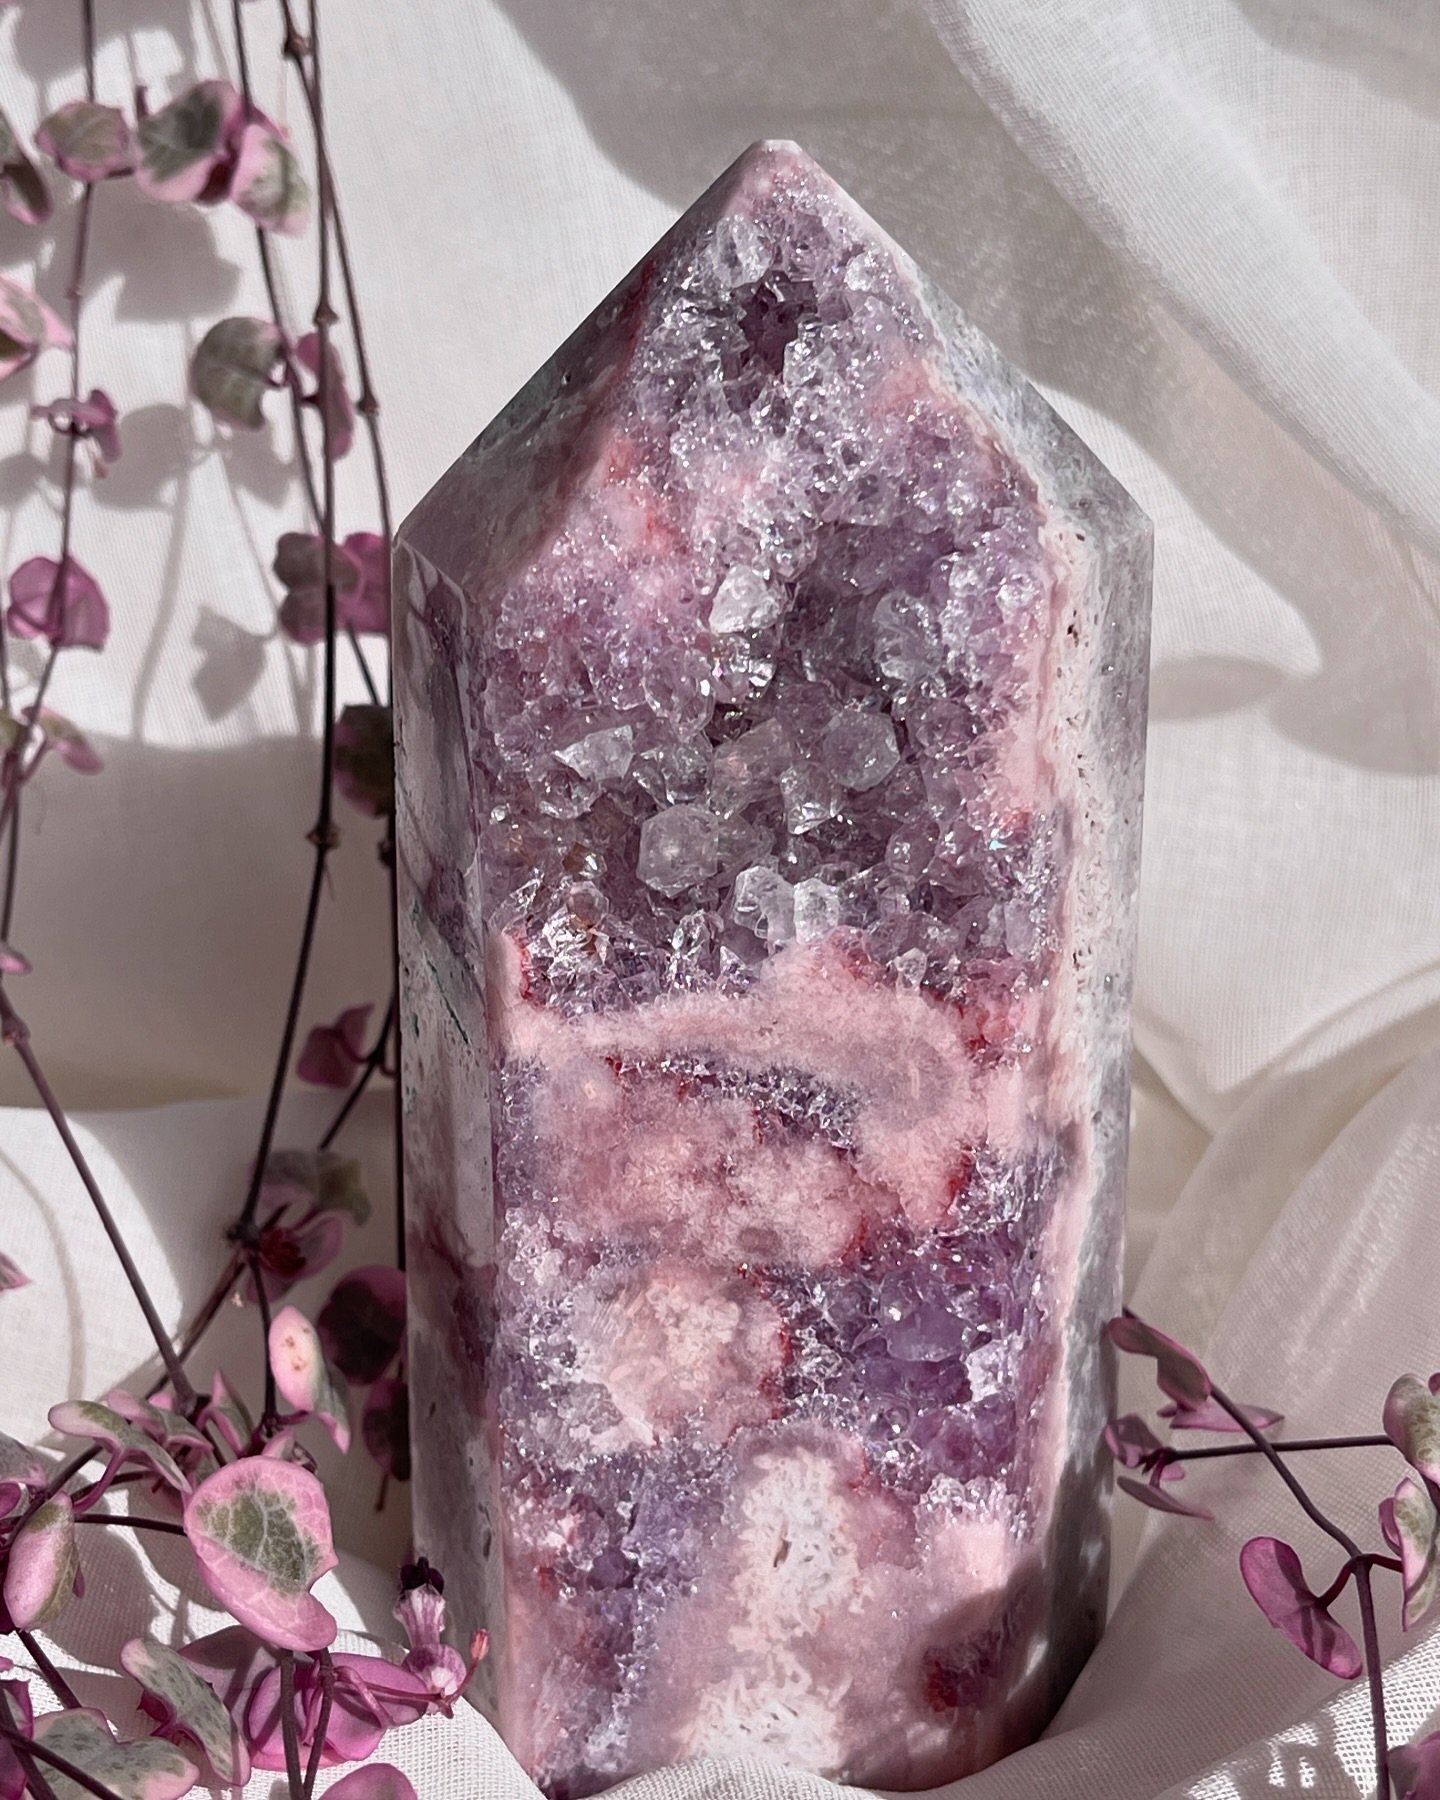 This tower reminds me of why I love Pink Amethyst. 

It&rsquo;s not perfect, but perfectly imperfect, with shadows and sparkles, with different tones and formations. Just beautiful! 

✨ She will be available in our next release&hellip;.Date TBC.

.

